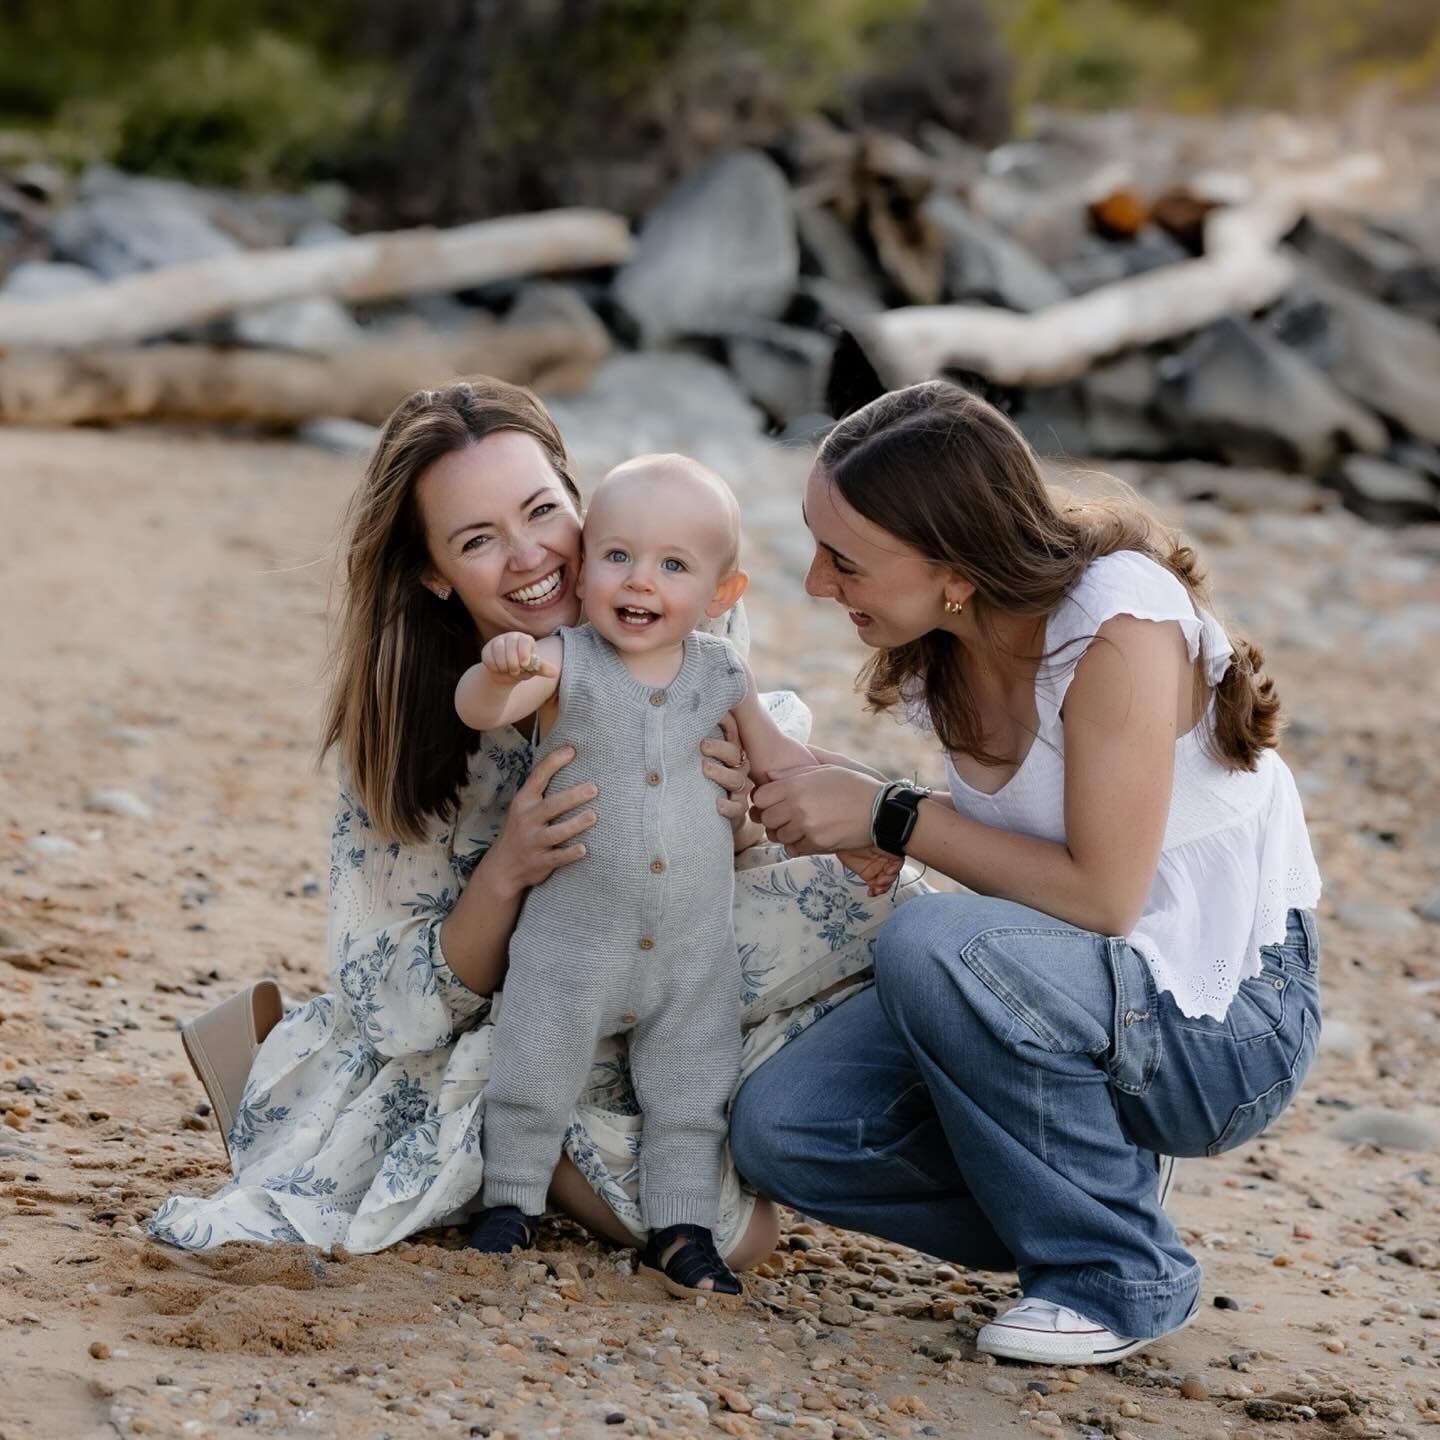 Sending out this gallery soon from River minis of mom and big sis! Love seeing this little guy again and his amazing smile! I may have had a few flyaway hairs to edit out on this super windy day 😄